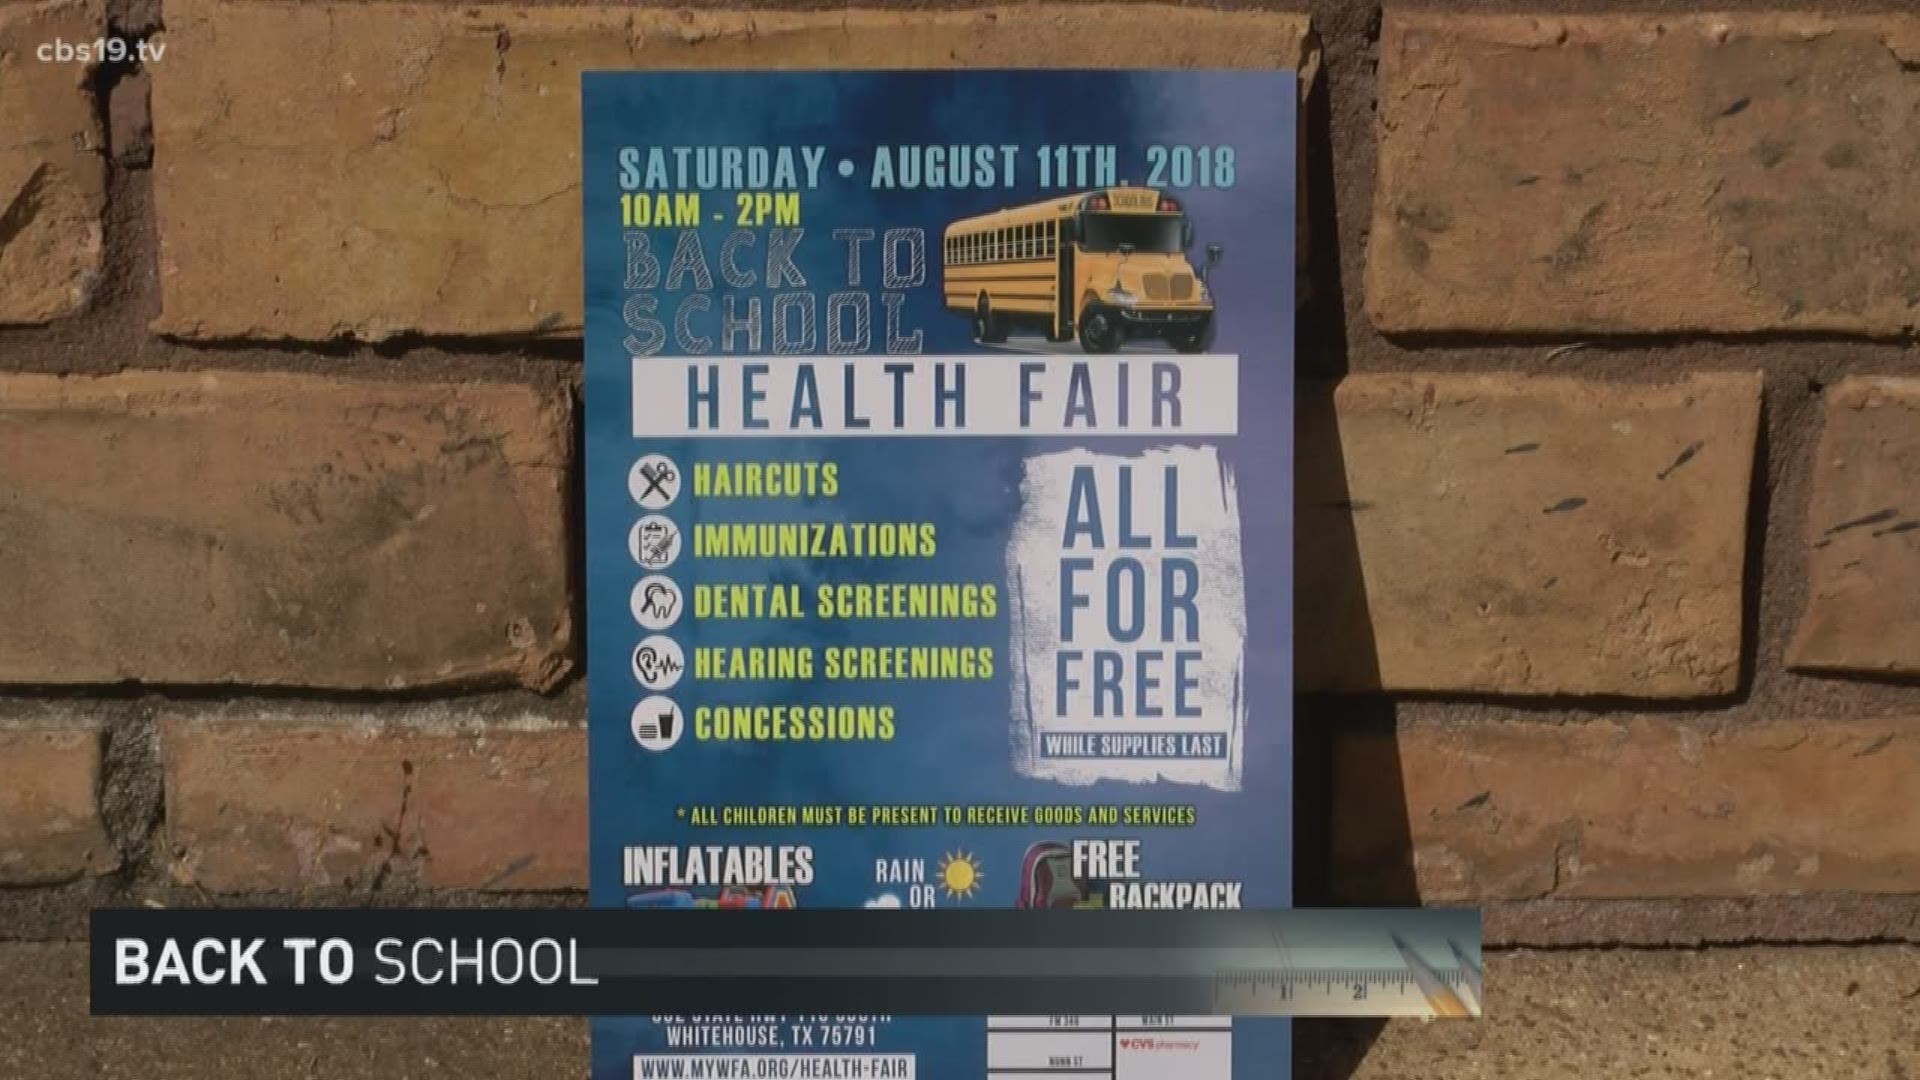 The City of Whitehouse is having a health fair and school supply giveaway on August 11th, find out what they will have and how the event came to be.